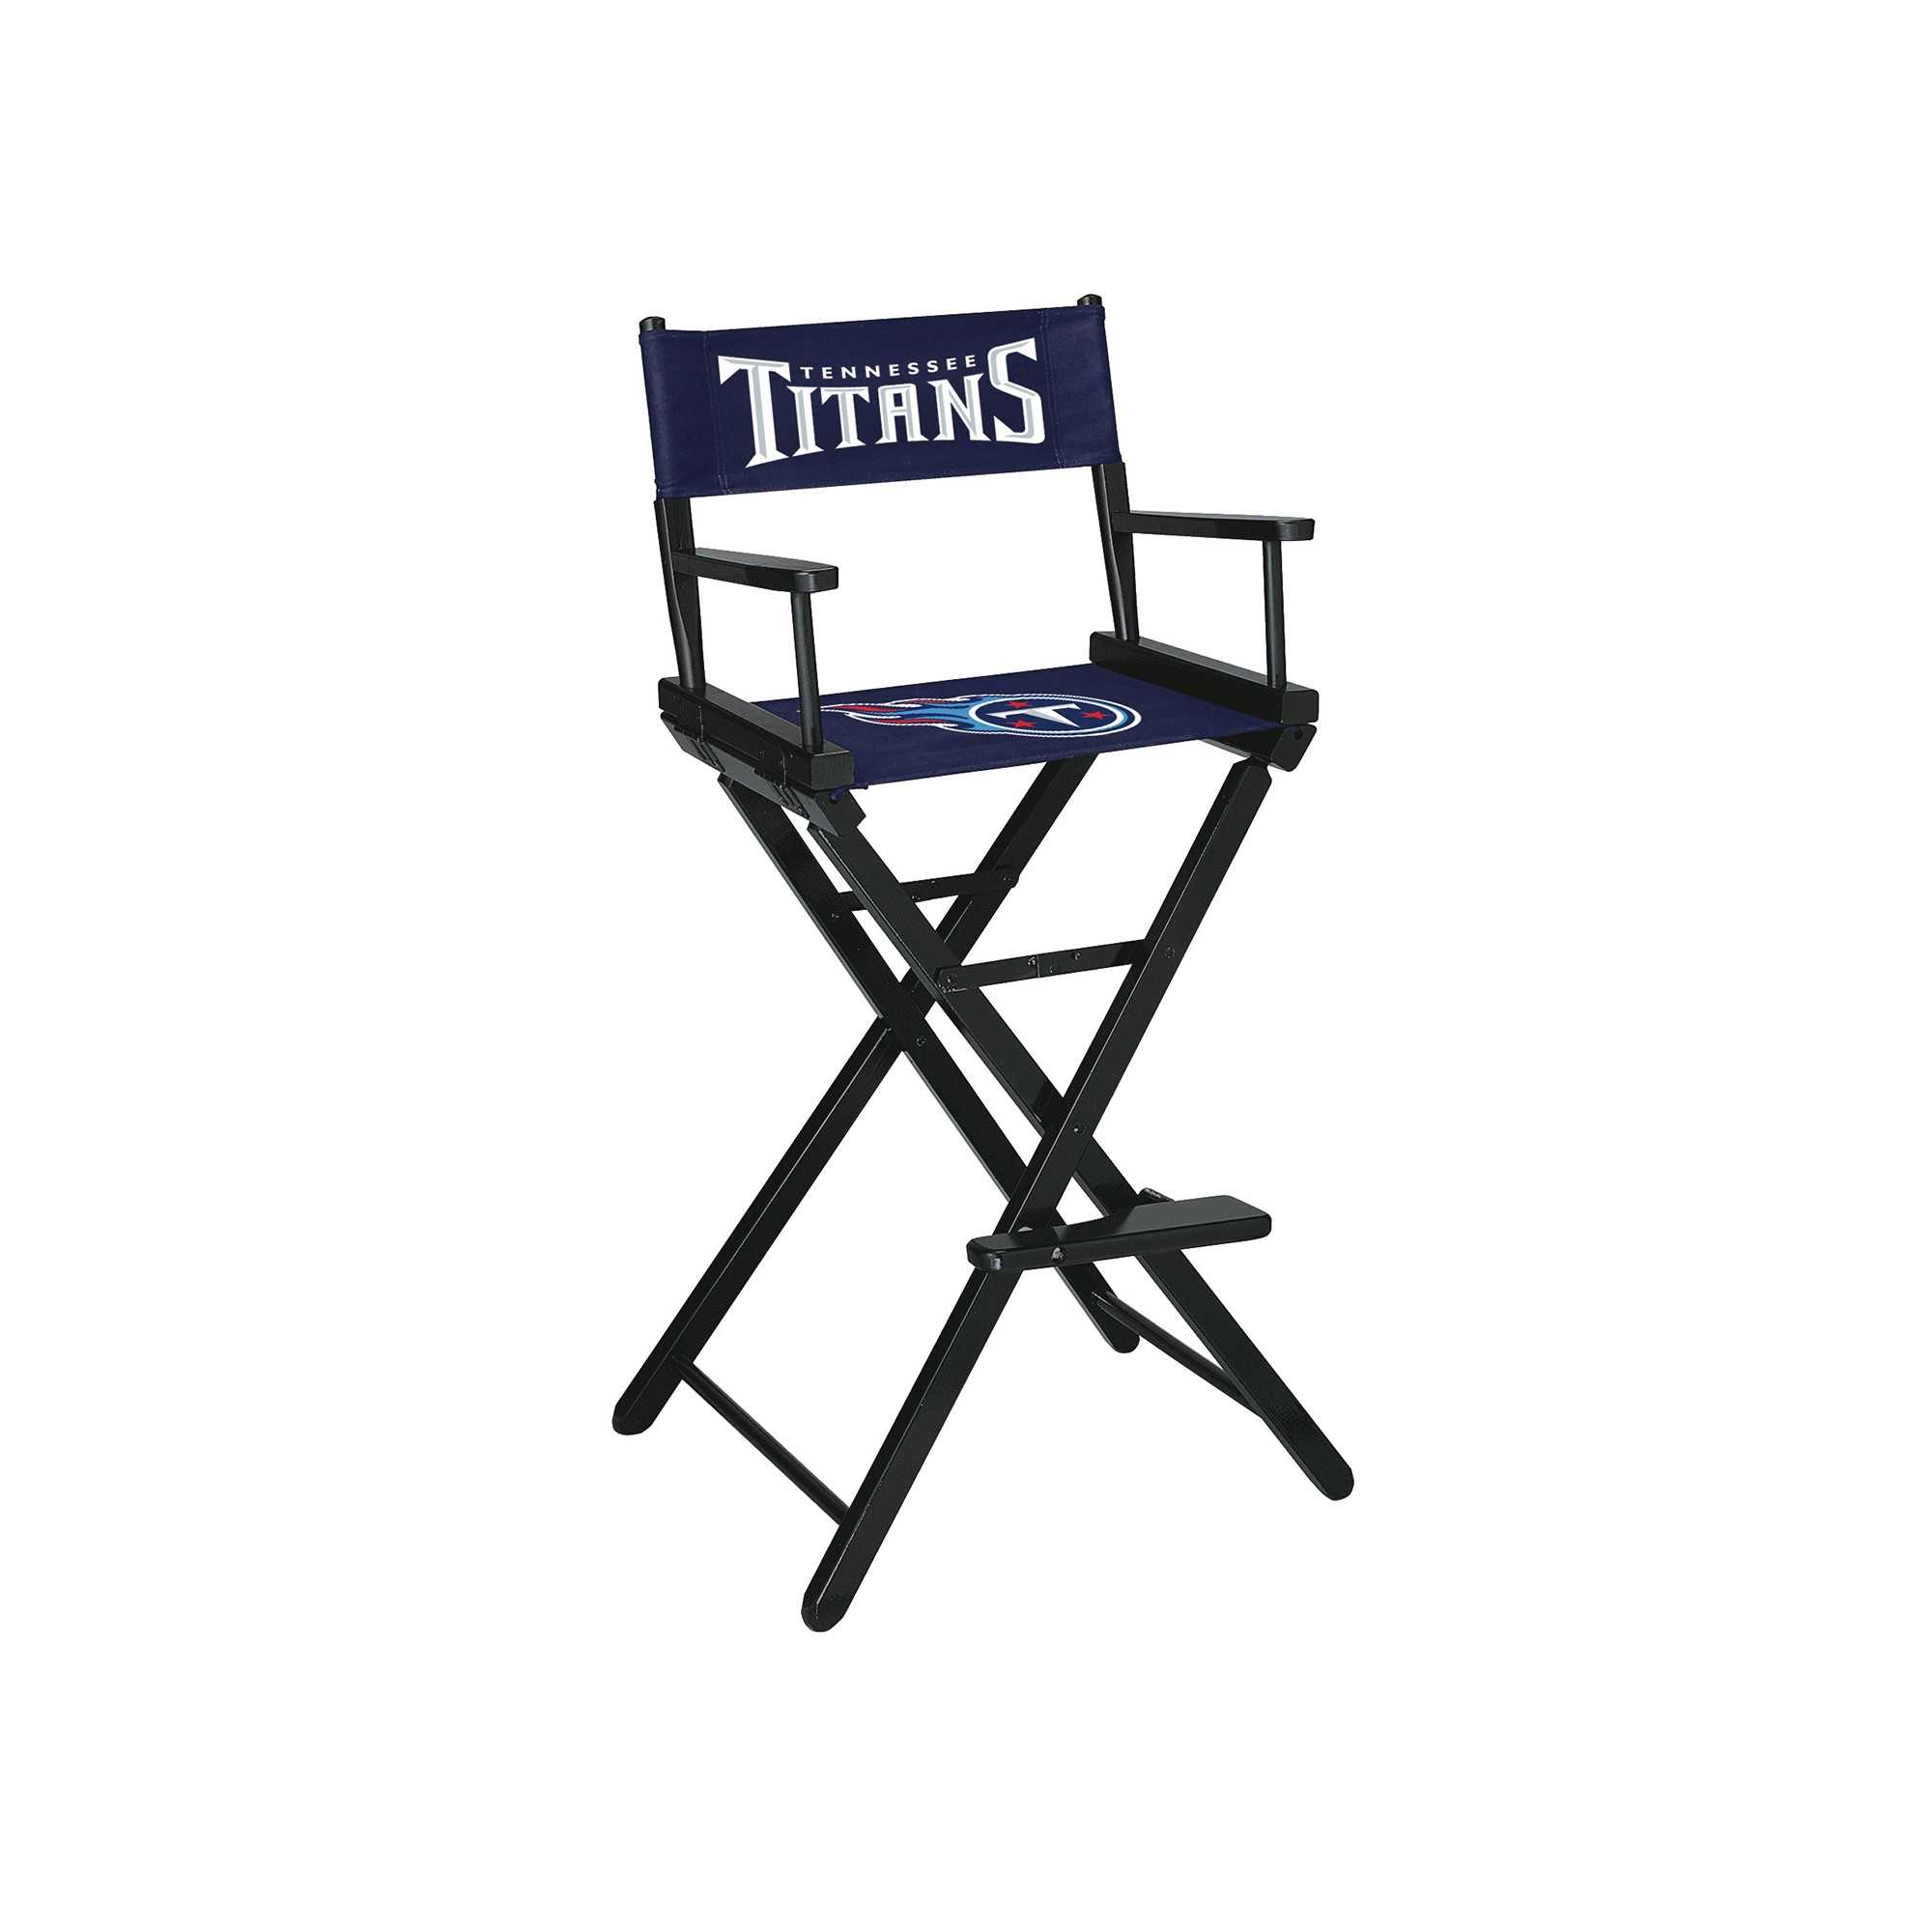 TENNESSEE TITANS BAR HEIGHT DIRECTORS CHAIR